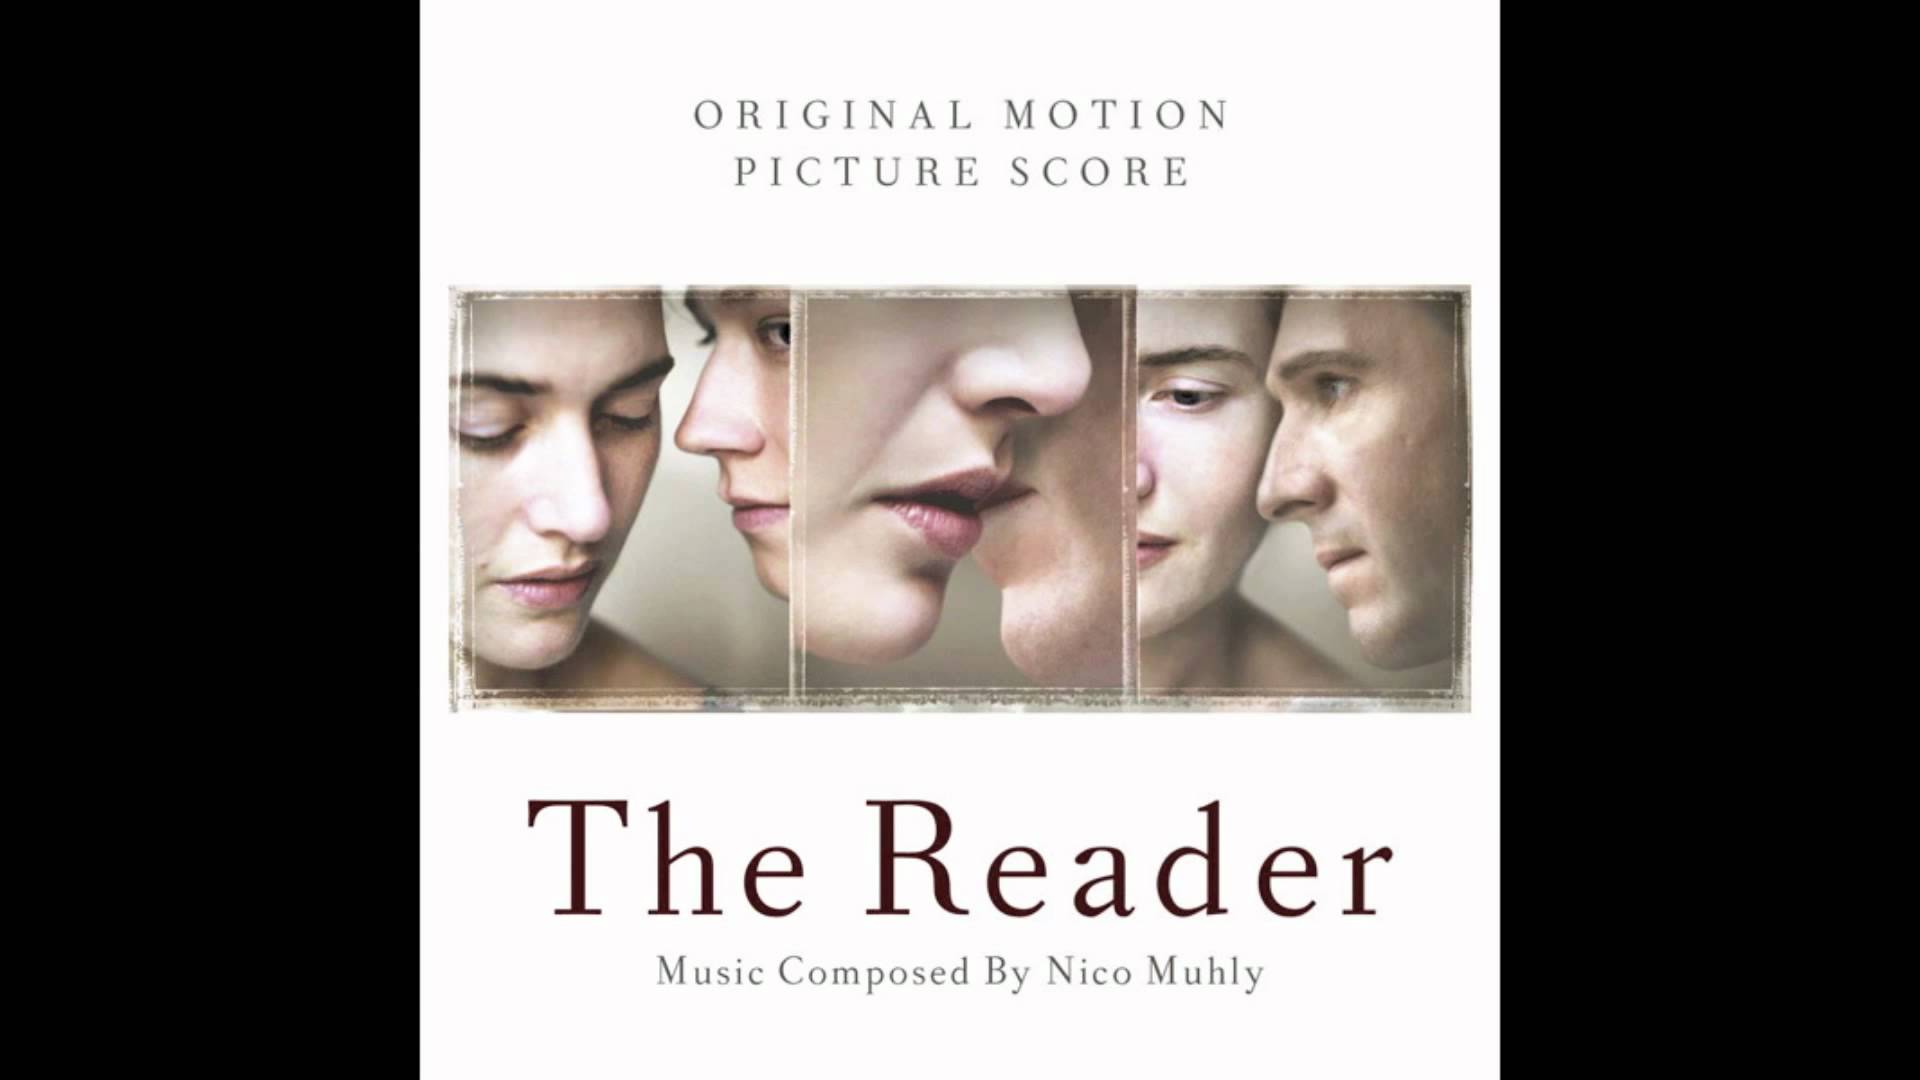 The Reader Soundtrack-05-Tram At Dawn-Nico Muhly - YouTube